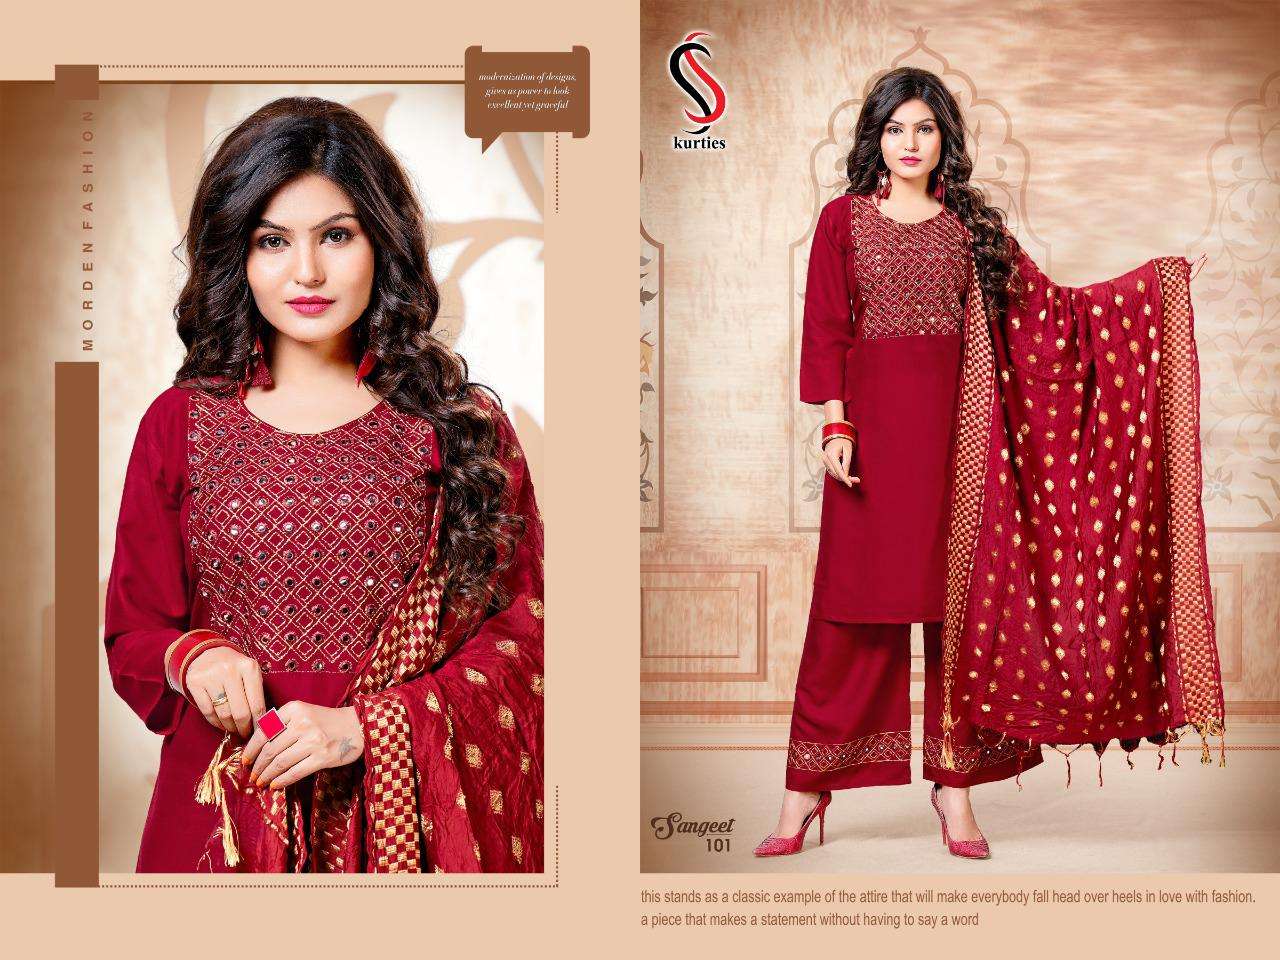 SANGEET BY S S KURTIS 101 TO 106 SERIES BEAUTIFUL SUITS COLORFUL STYLISH FANCY CASUAL WEAR & ETHNIC WEAR RAYON WITH WORK DRESSES AT WHOLESALE PRICE